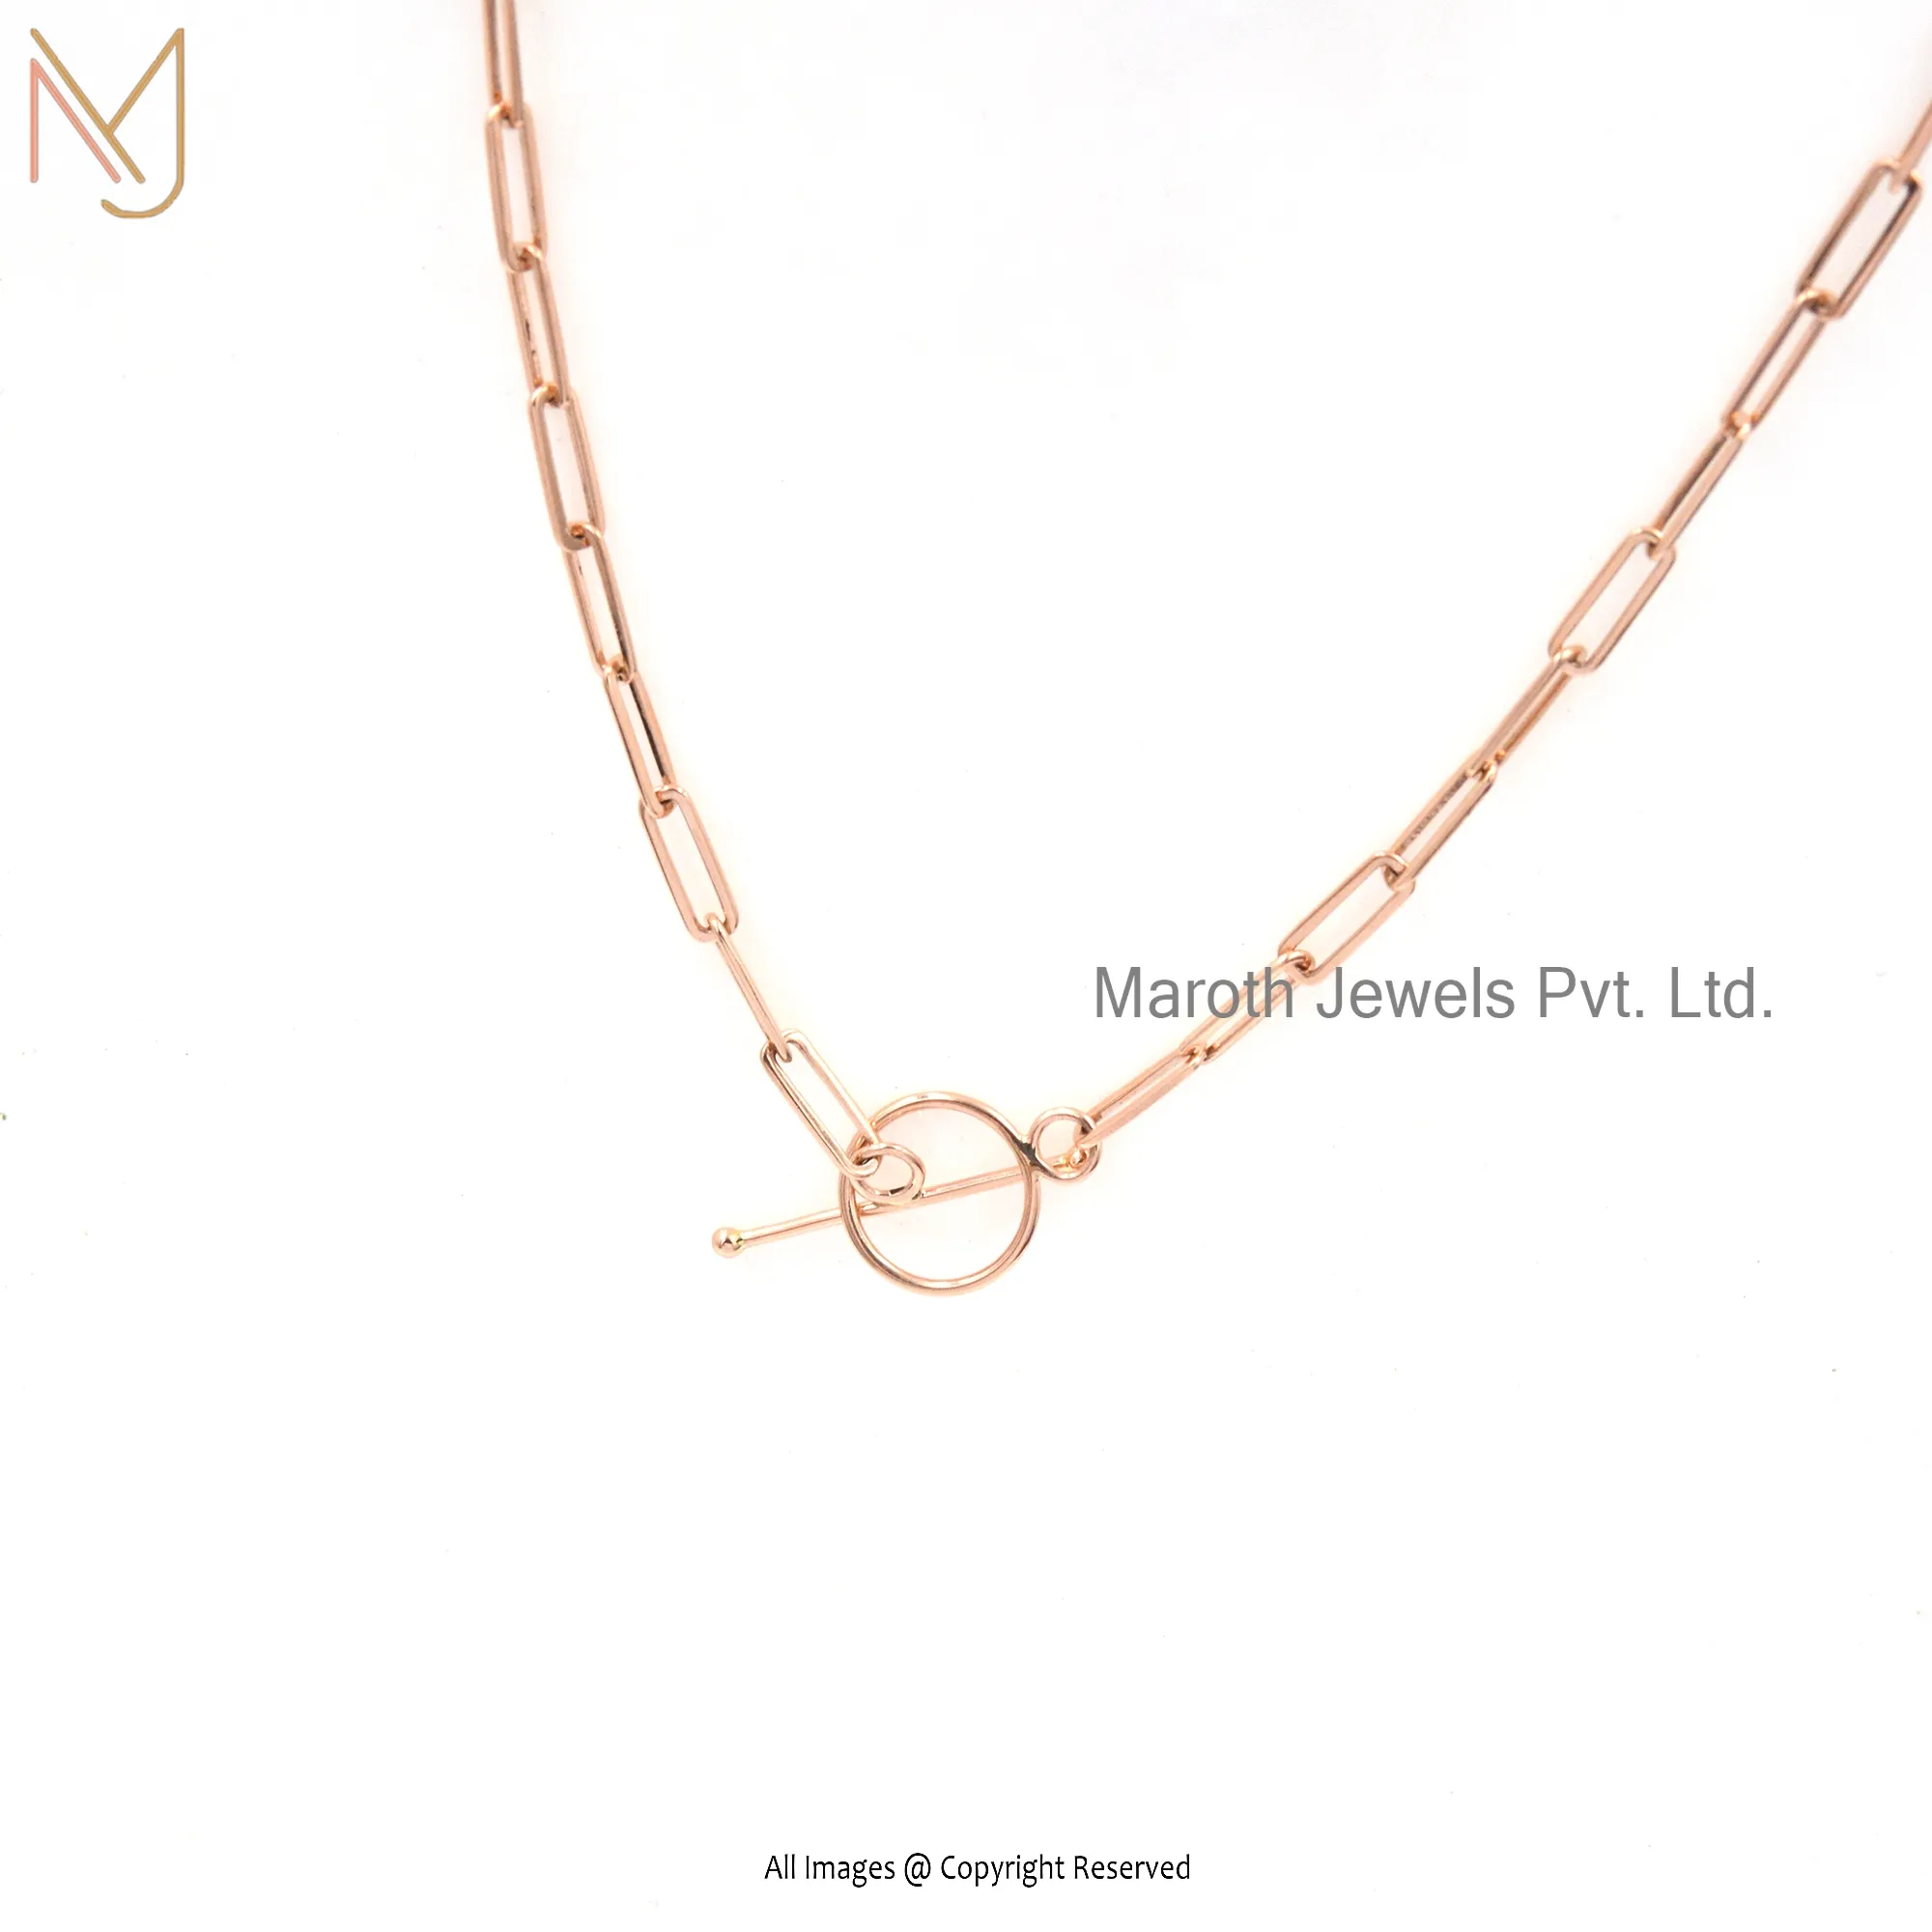 Private Label 9K Rose Gold Paperclip Chain With 9K Rose Gold Toggle Clasp